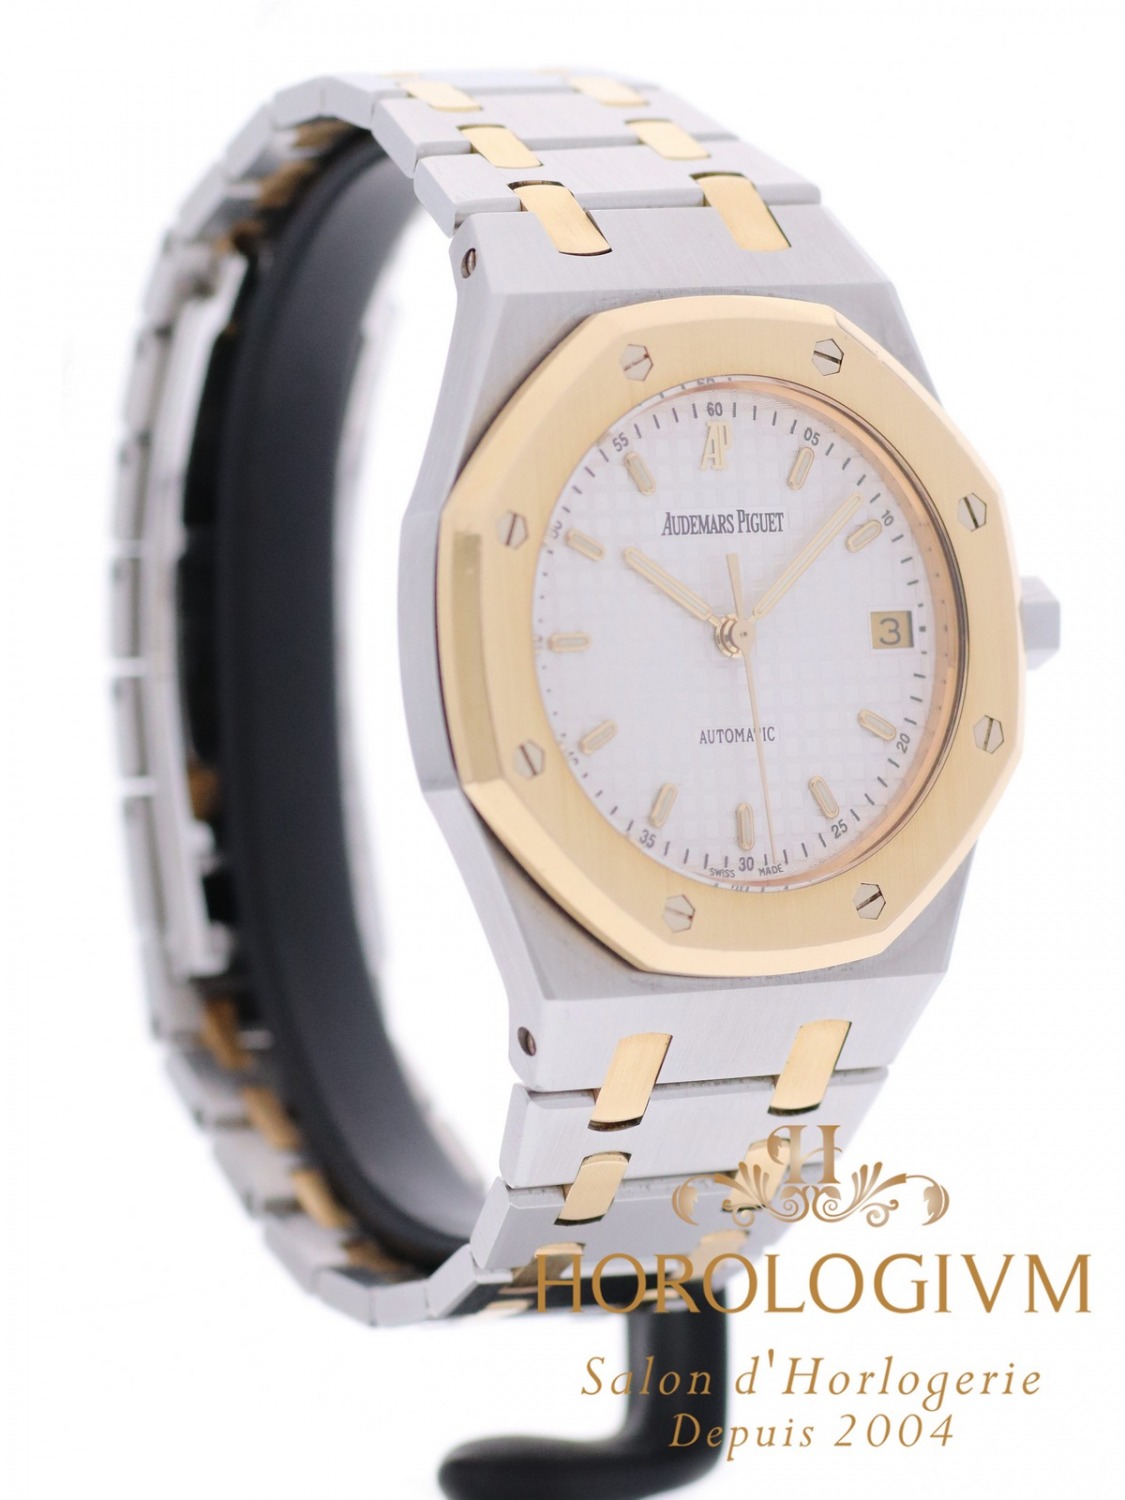 Audemars Piguet Royal Oak Two-Tone 36 MM watch, two tone (bi - colored) silver and yellow gold